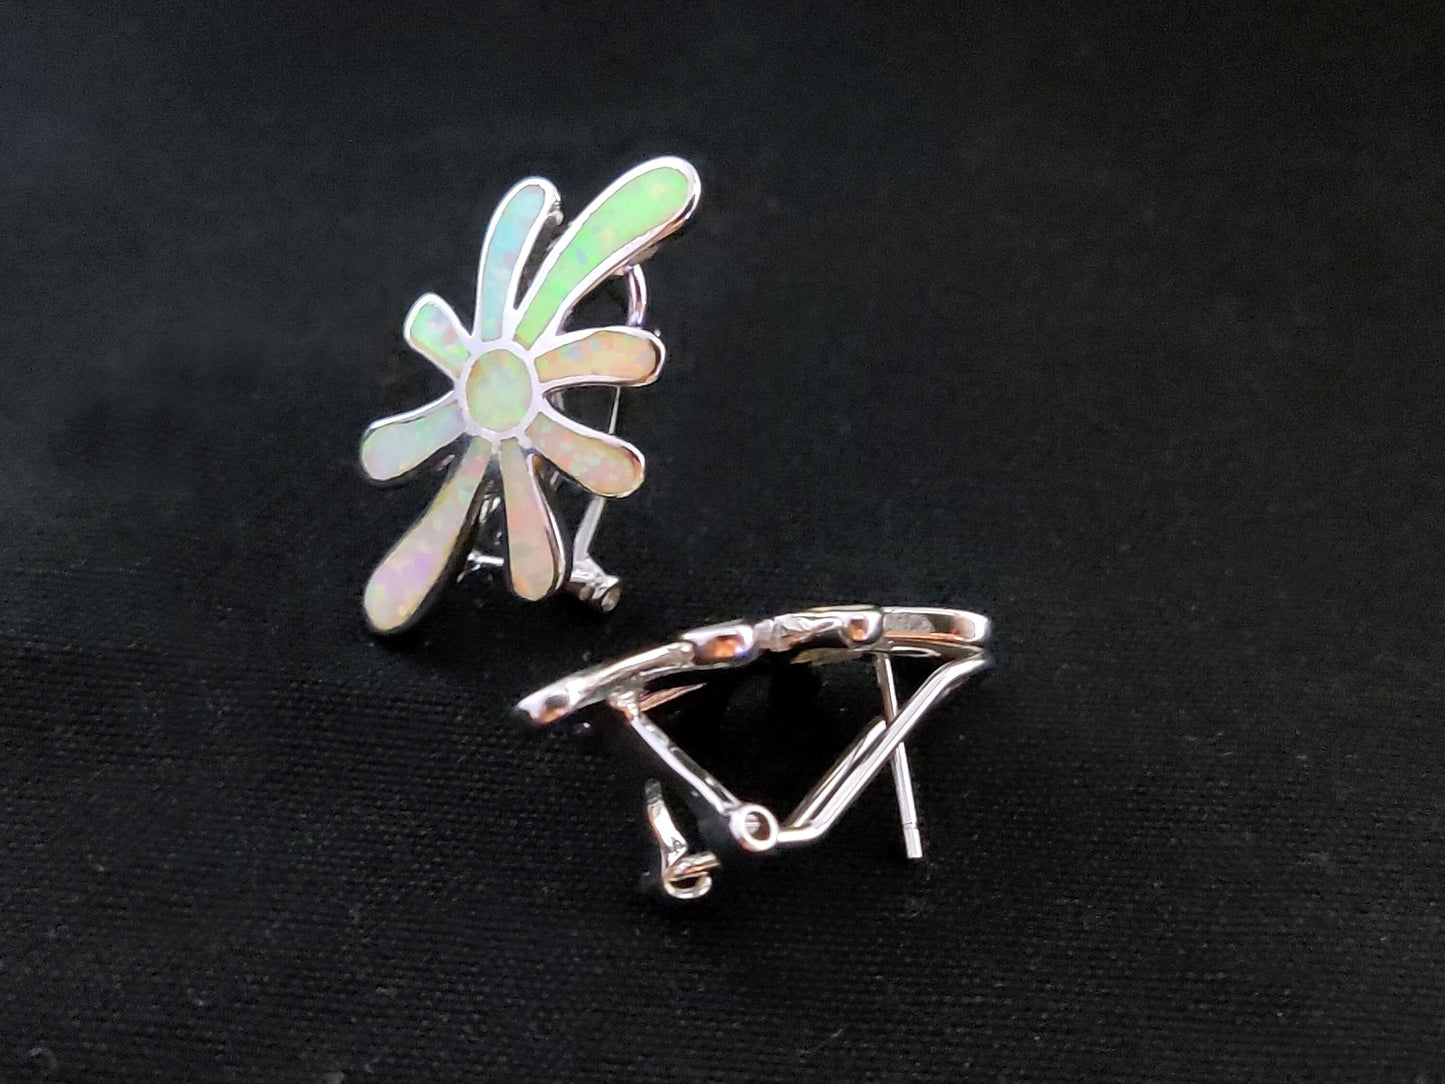 Sterling Silver 925 Fire Rainbow White Opal Flower Earrings, Flower Earrings, White Opal Earrings With French Clip, Griechischer Ohrringe